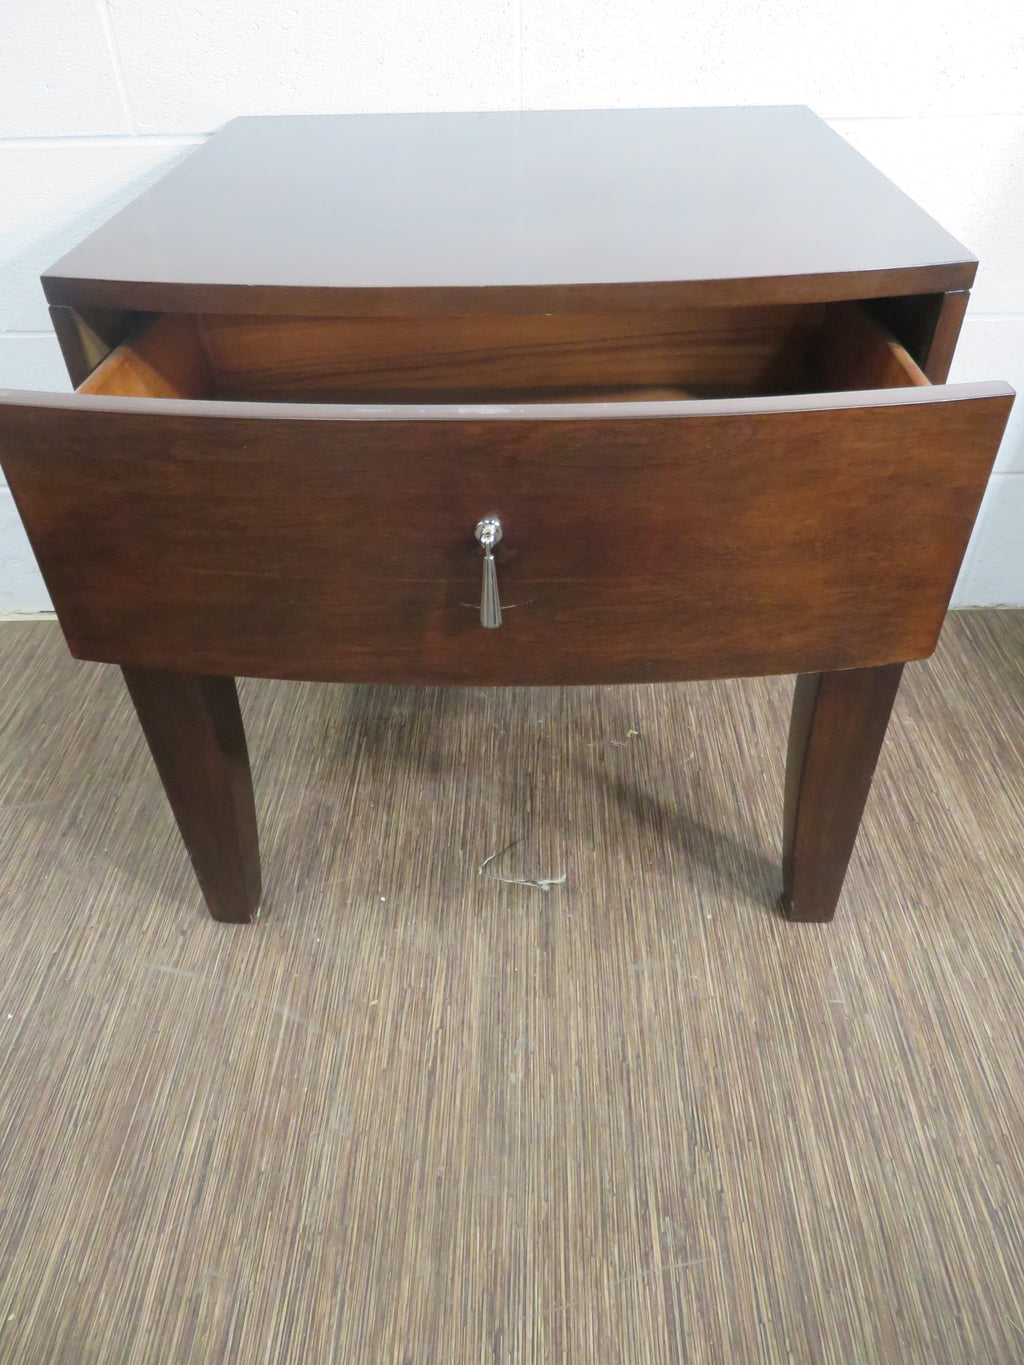 Single Drawer Wooden Side Table